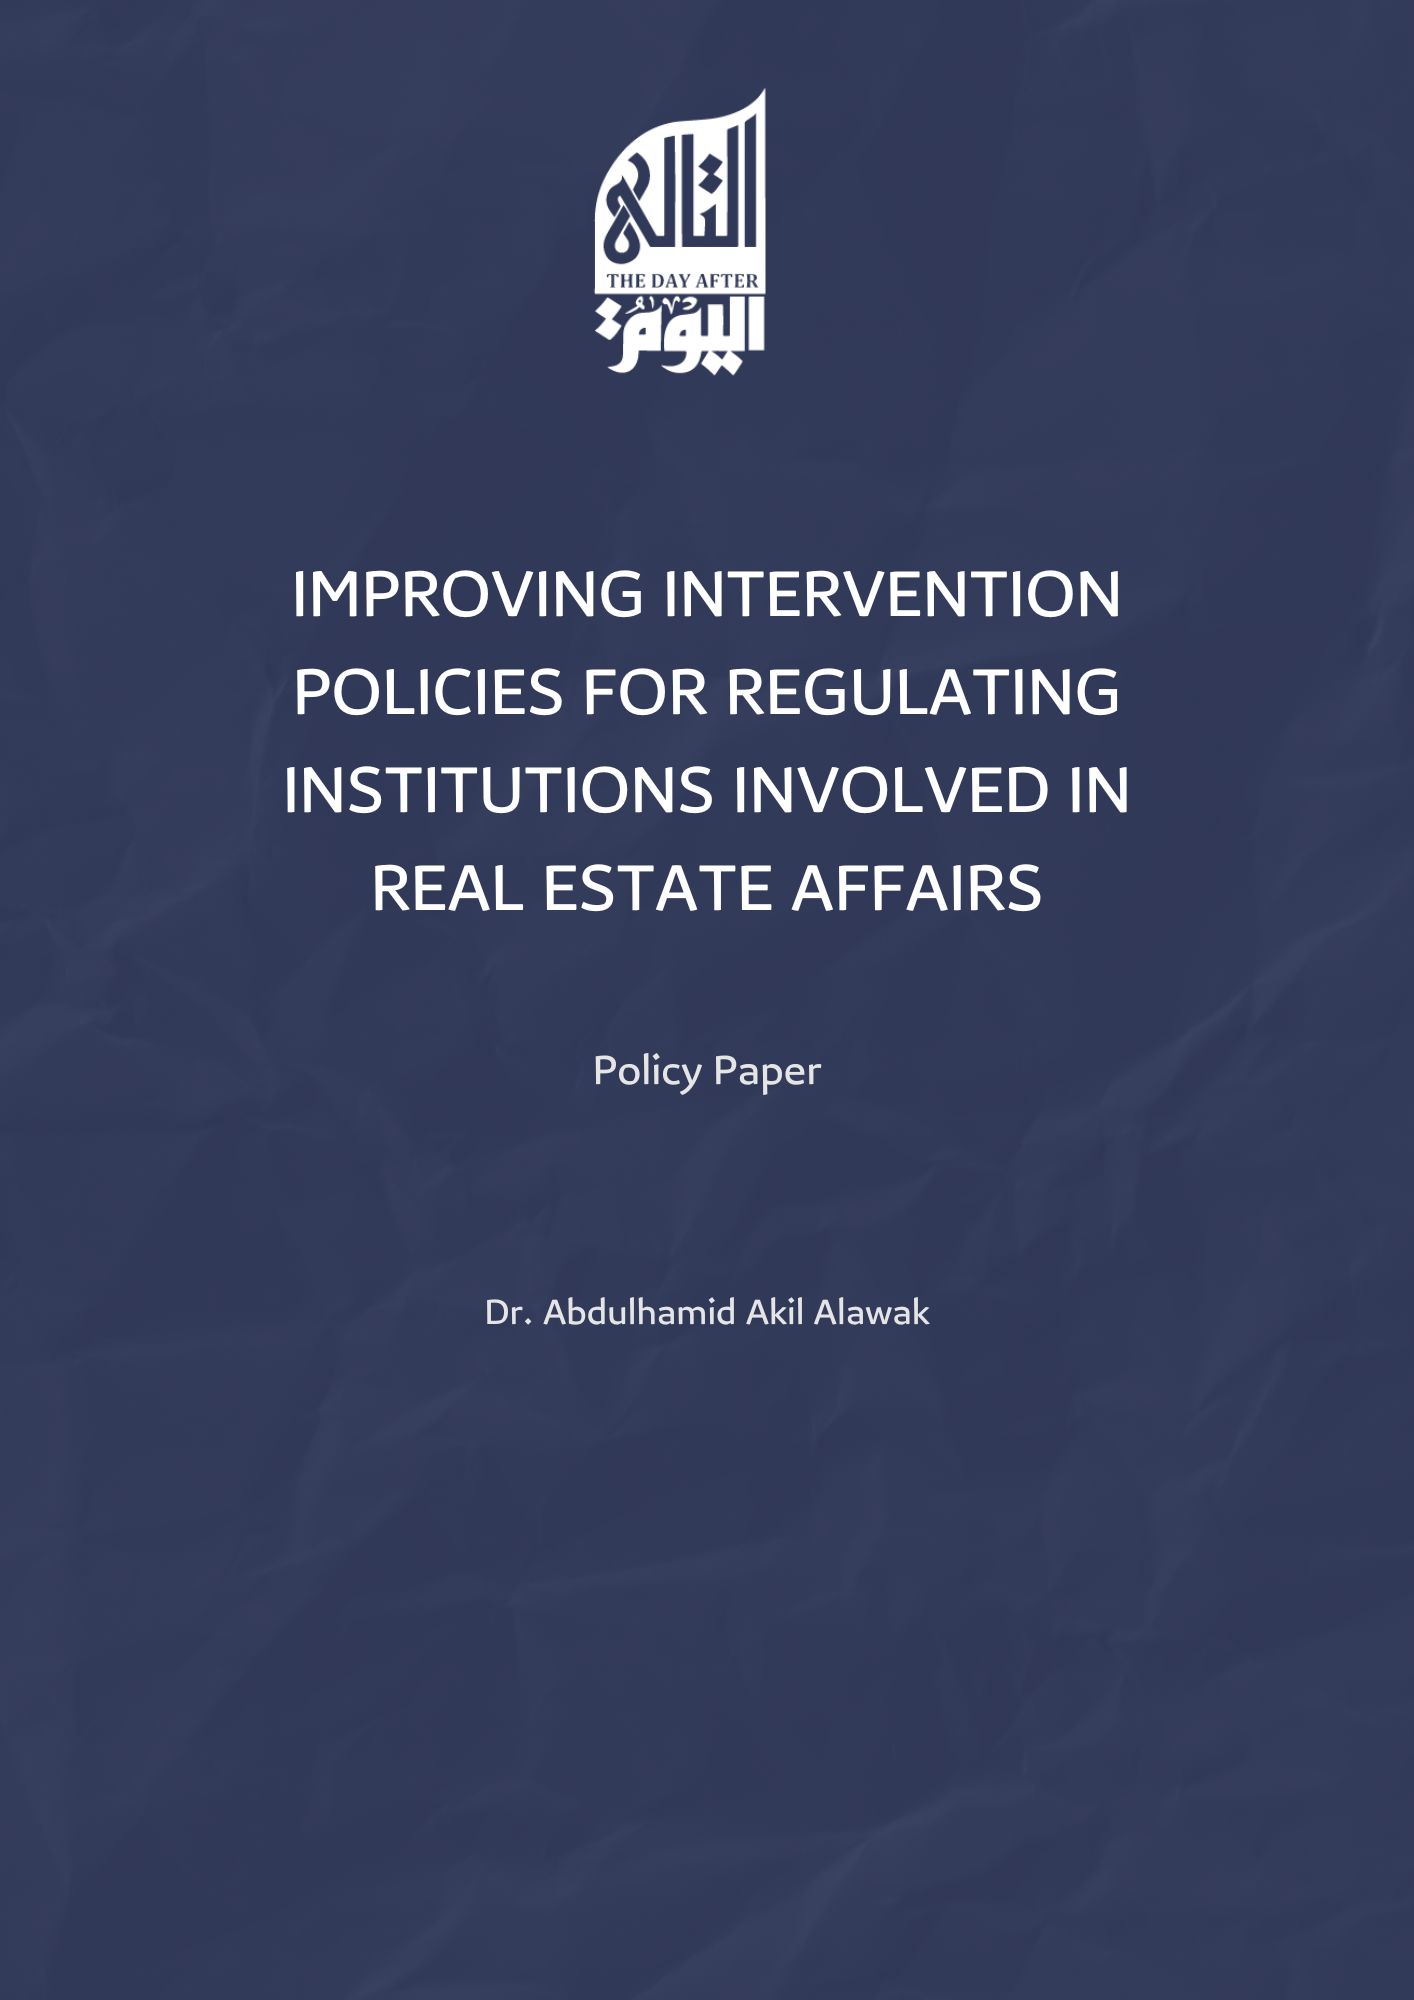 Improving Intervention Policies for Regulating Institutions Involved in Real Estate Affairs